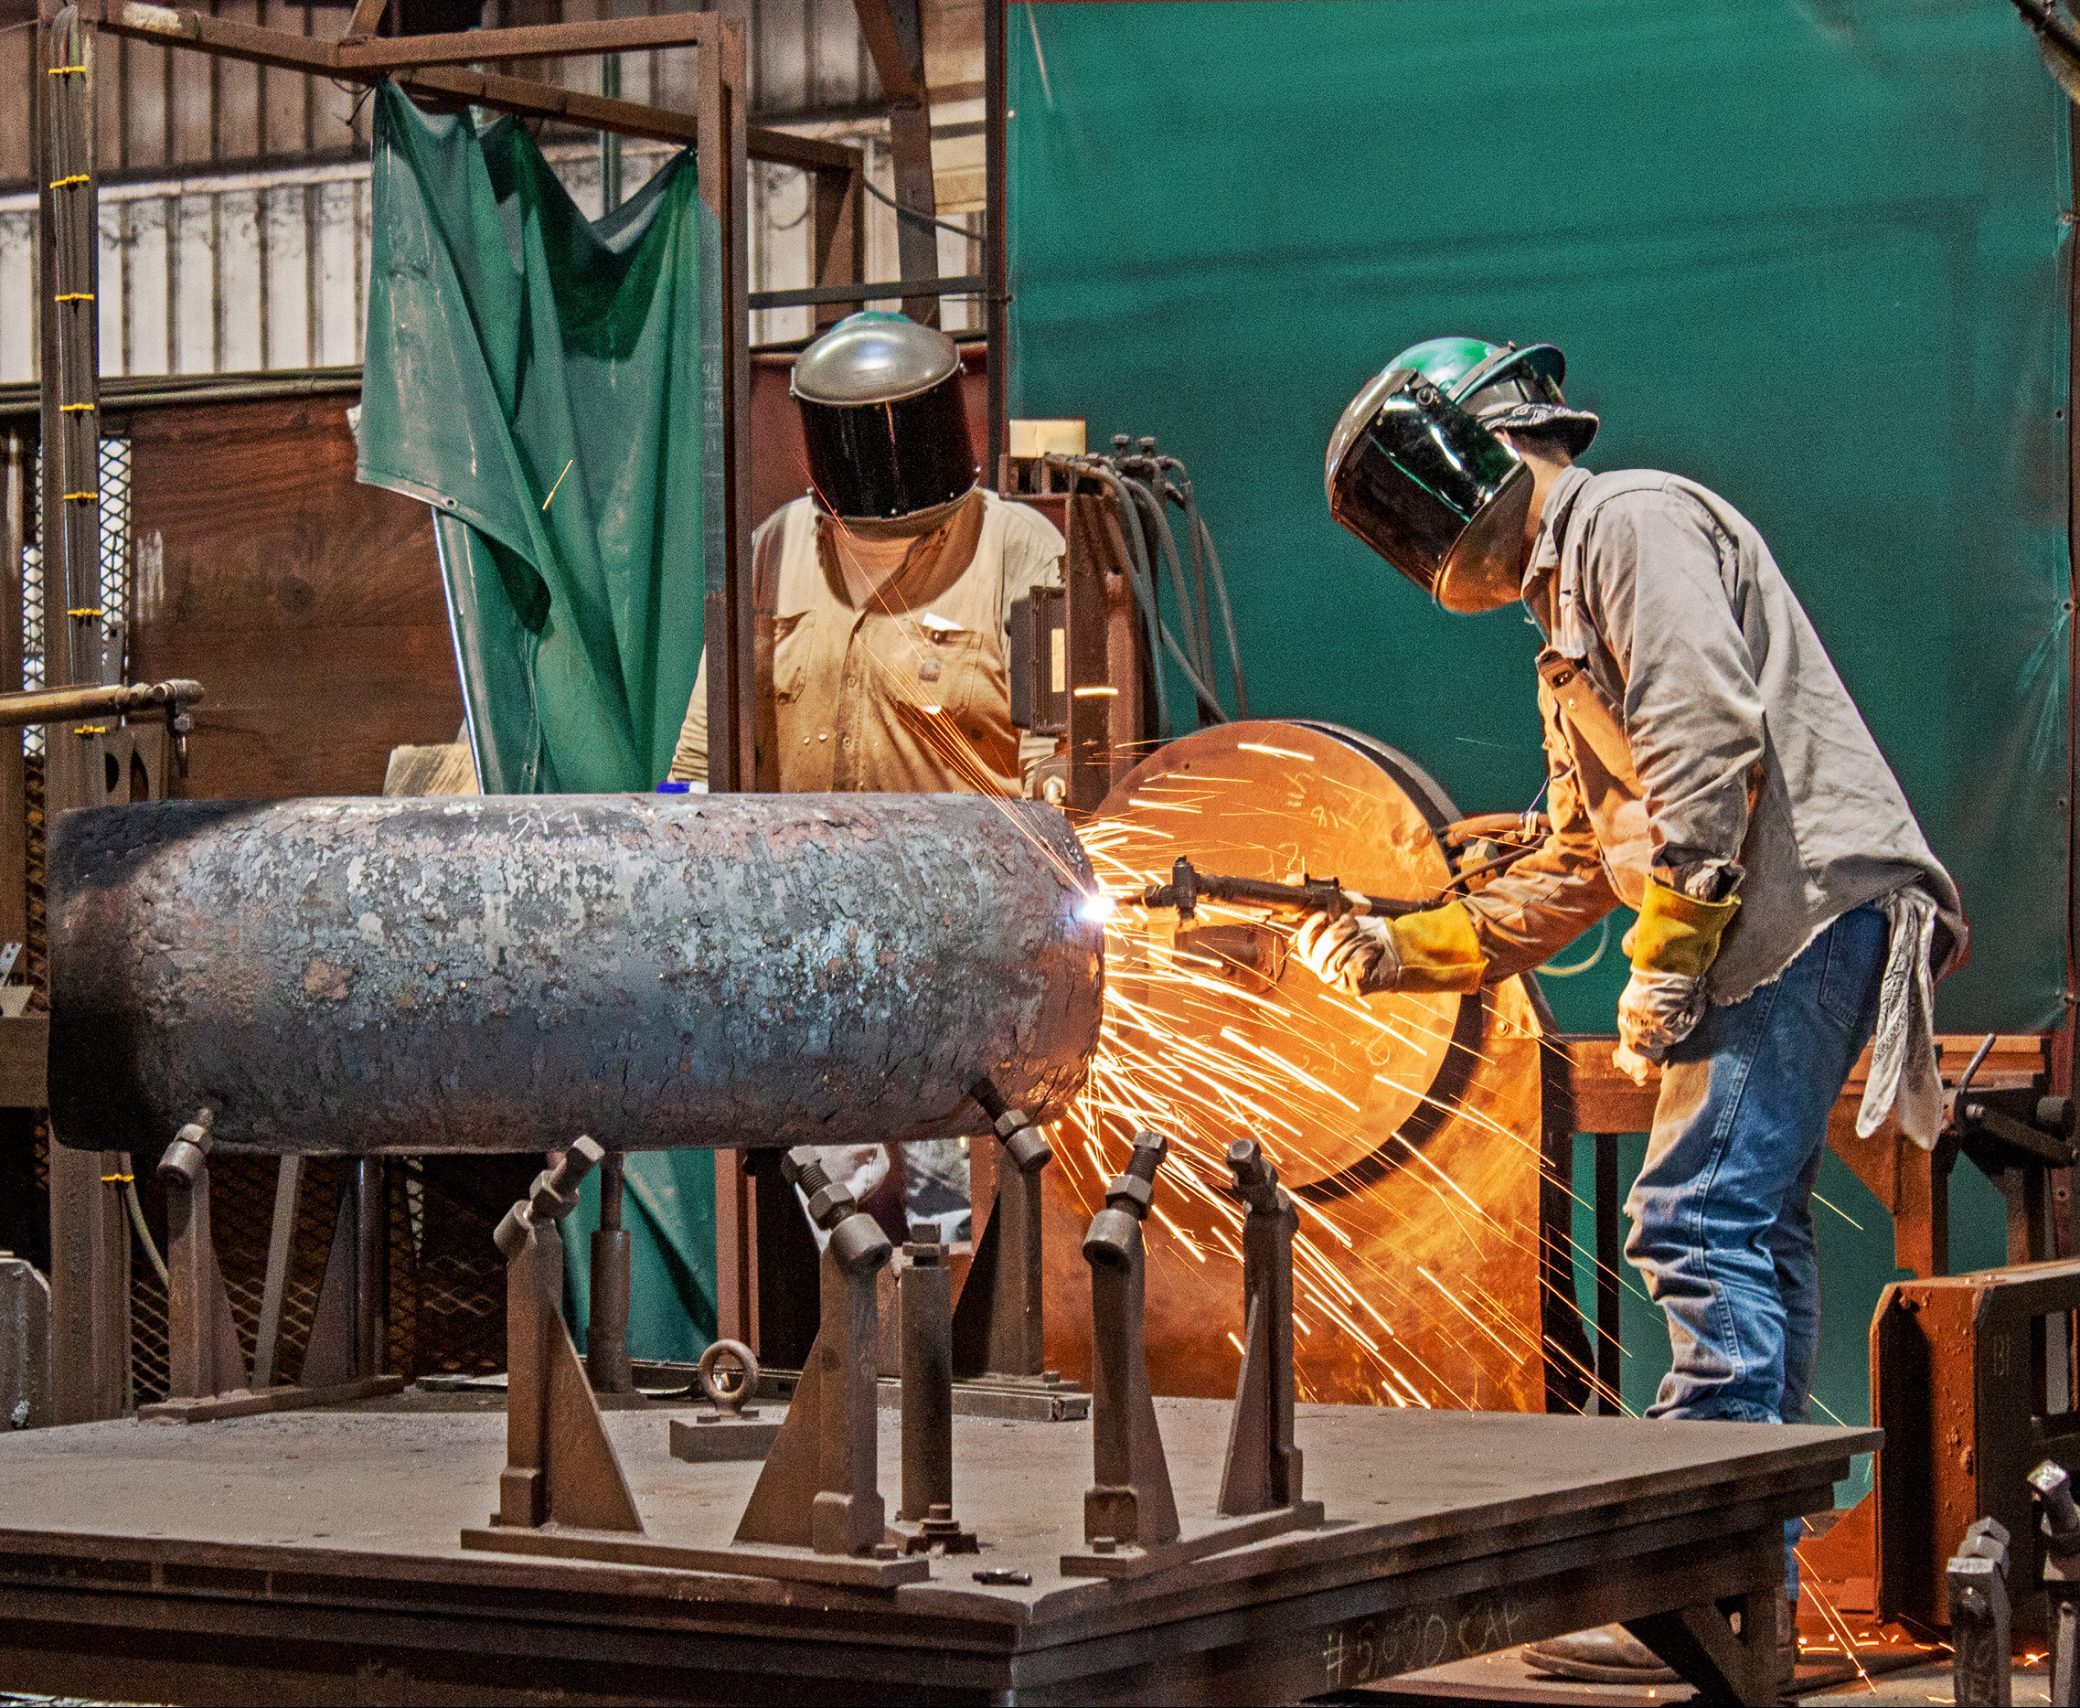 Workers in protective gear weld a large carbon fitting.